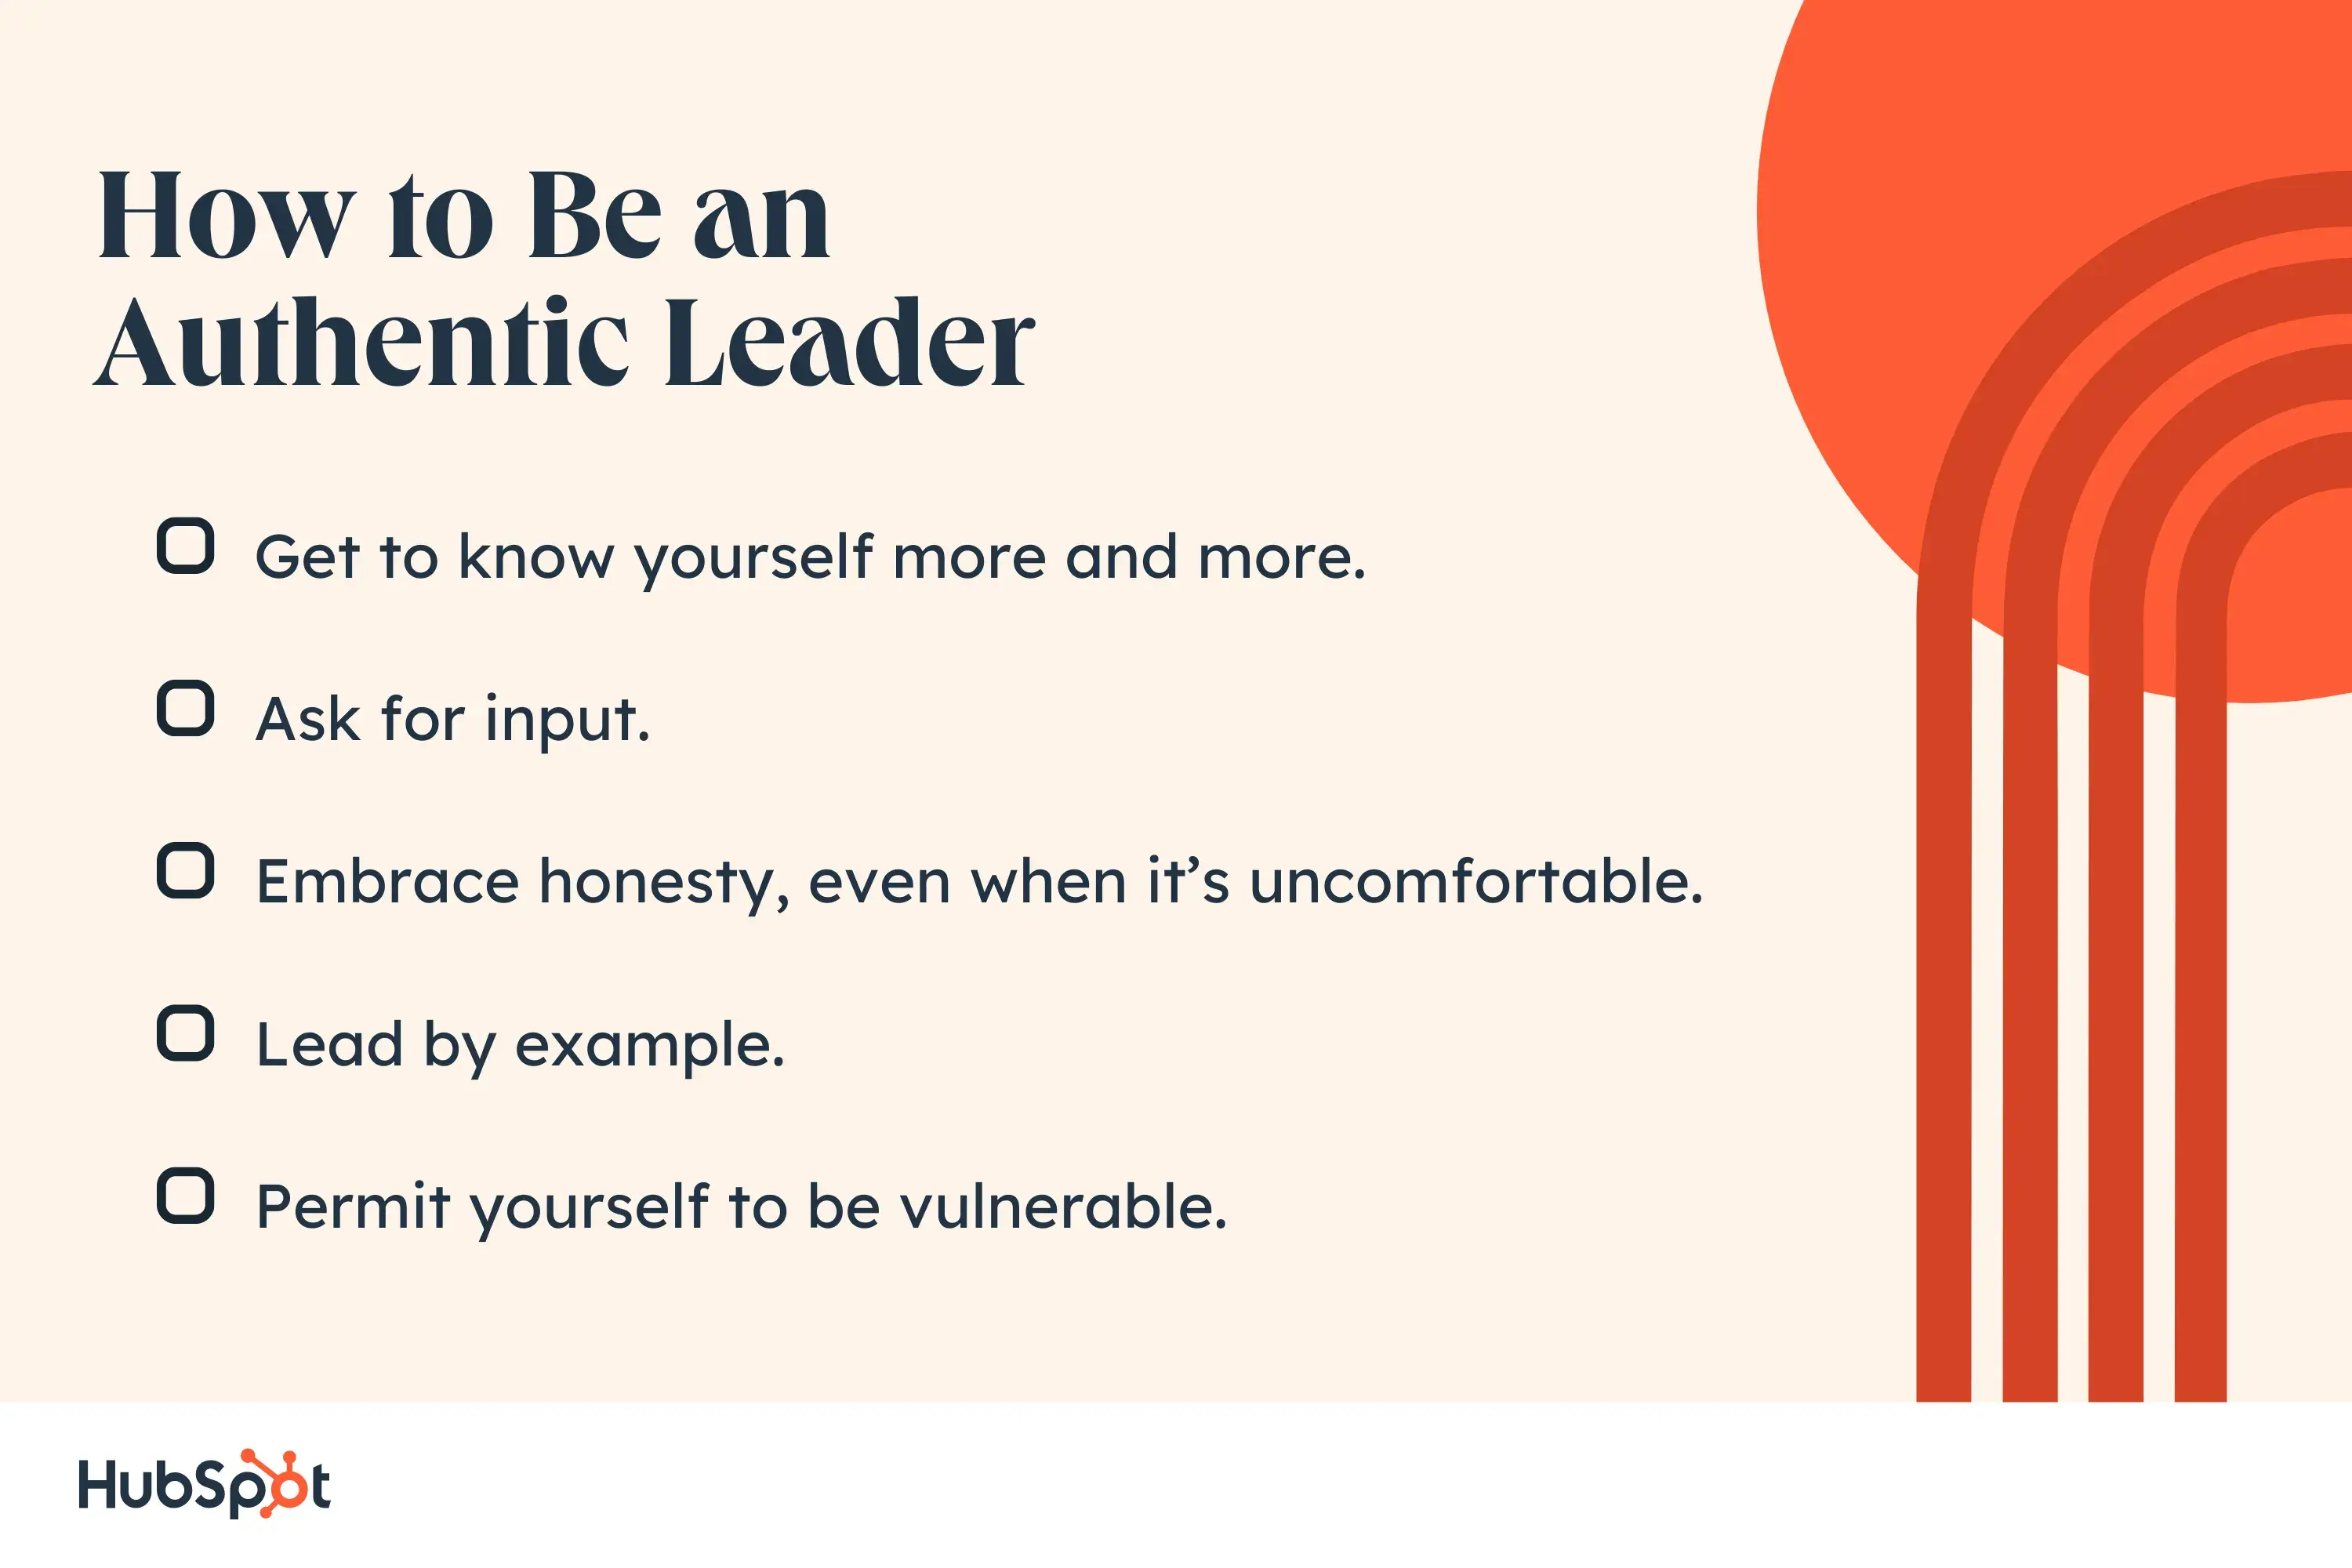 howto 3 - Authentic Leadership — How to Lead While Staying True to Yourself